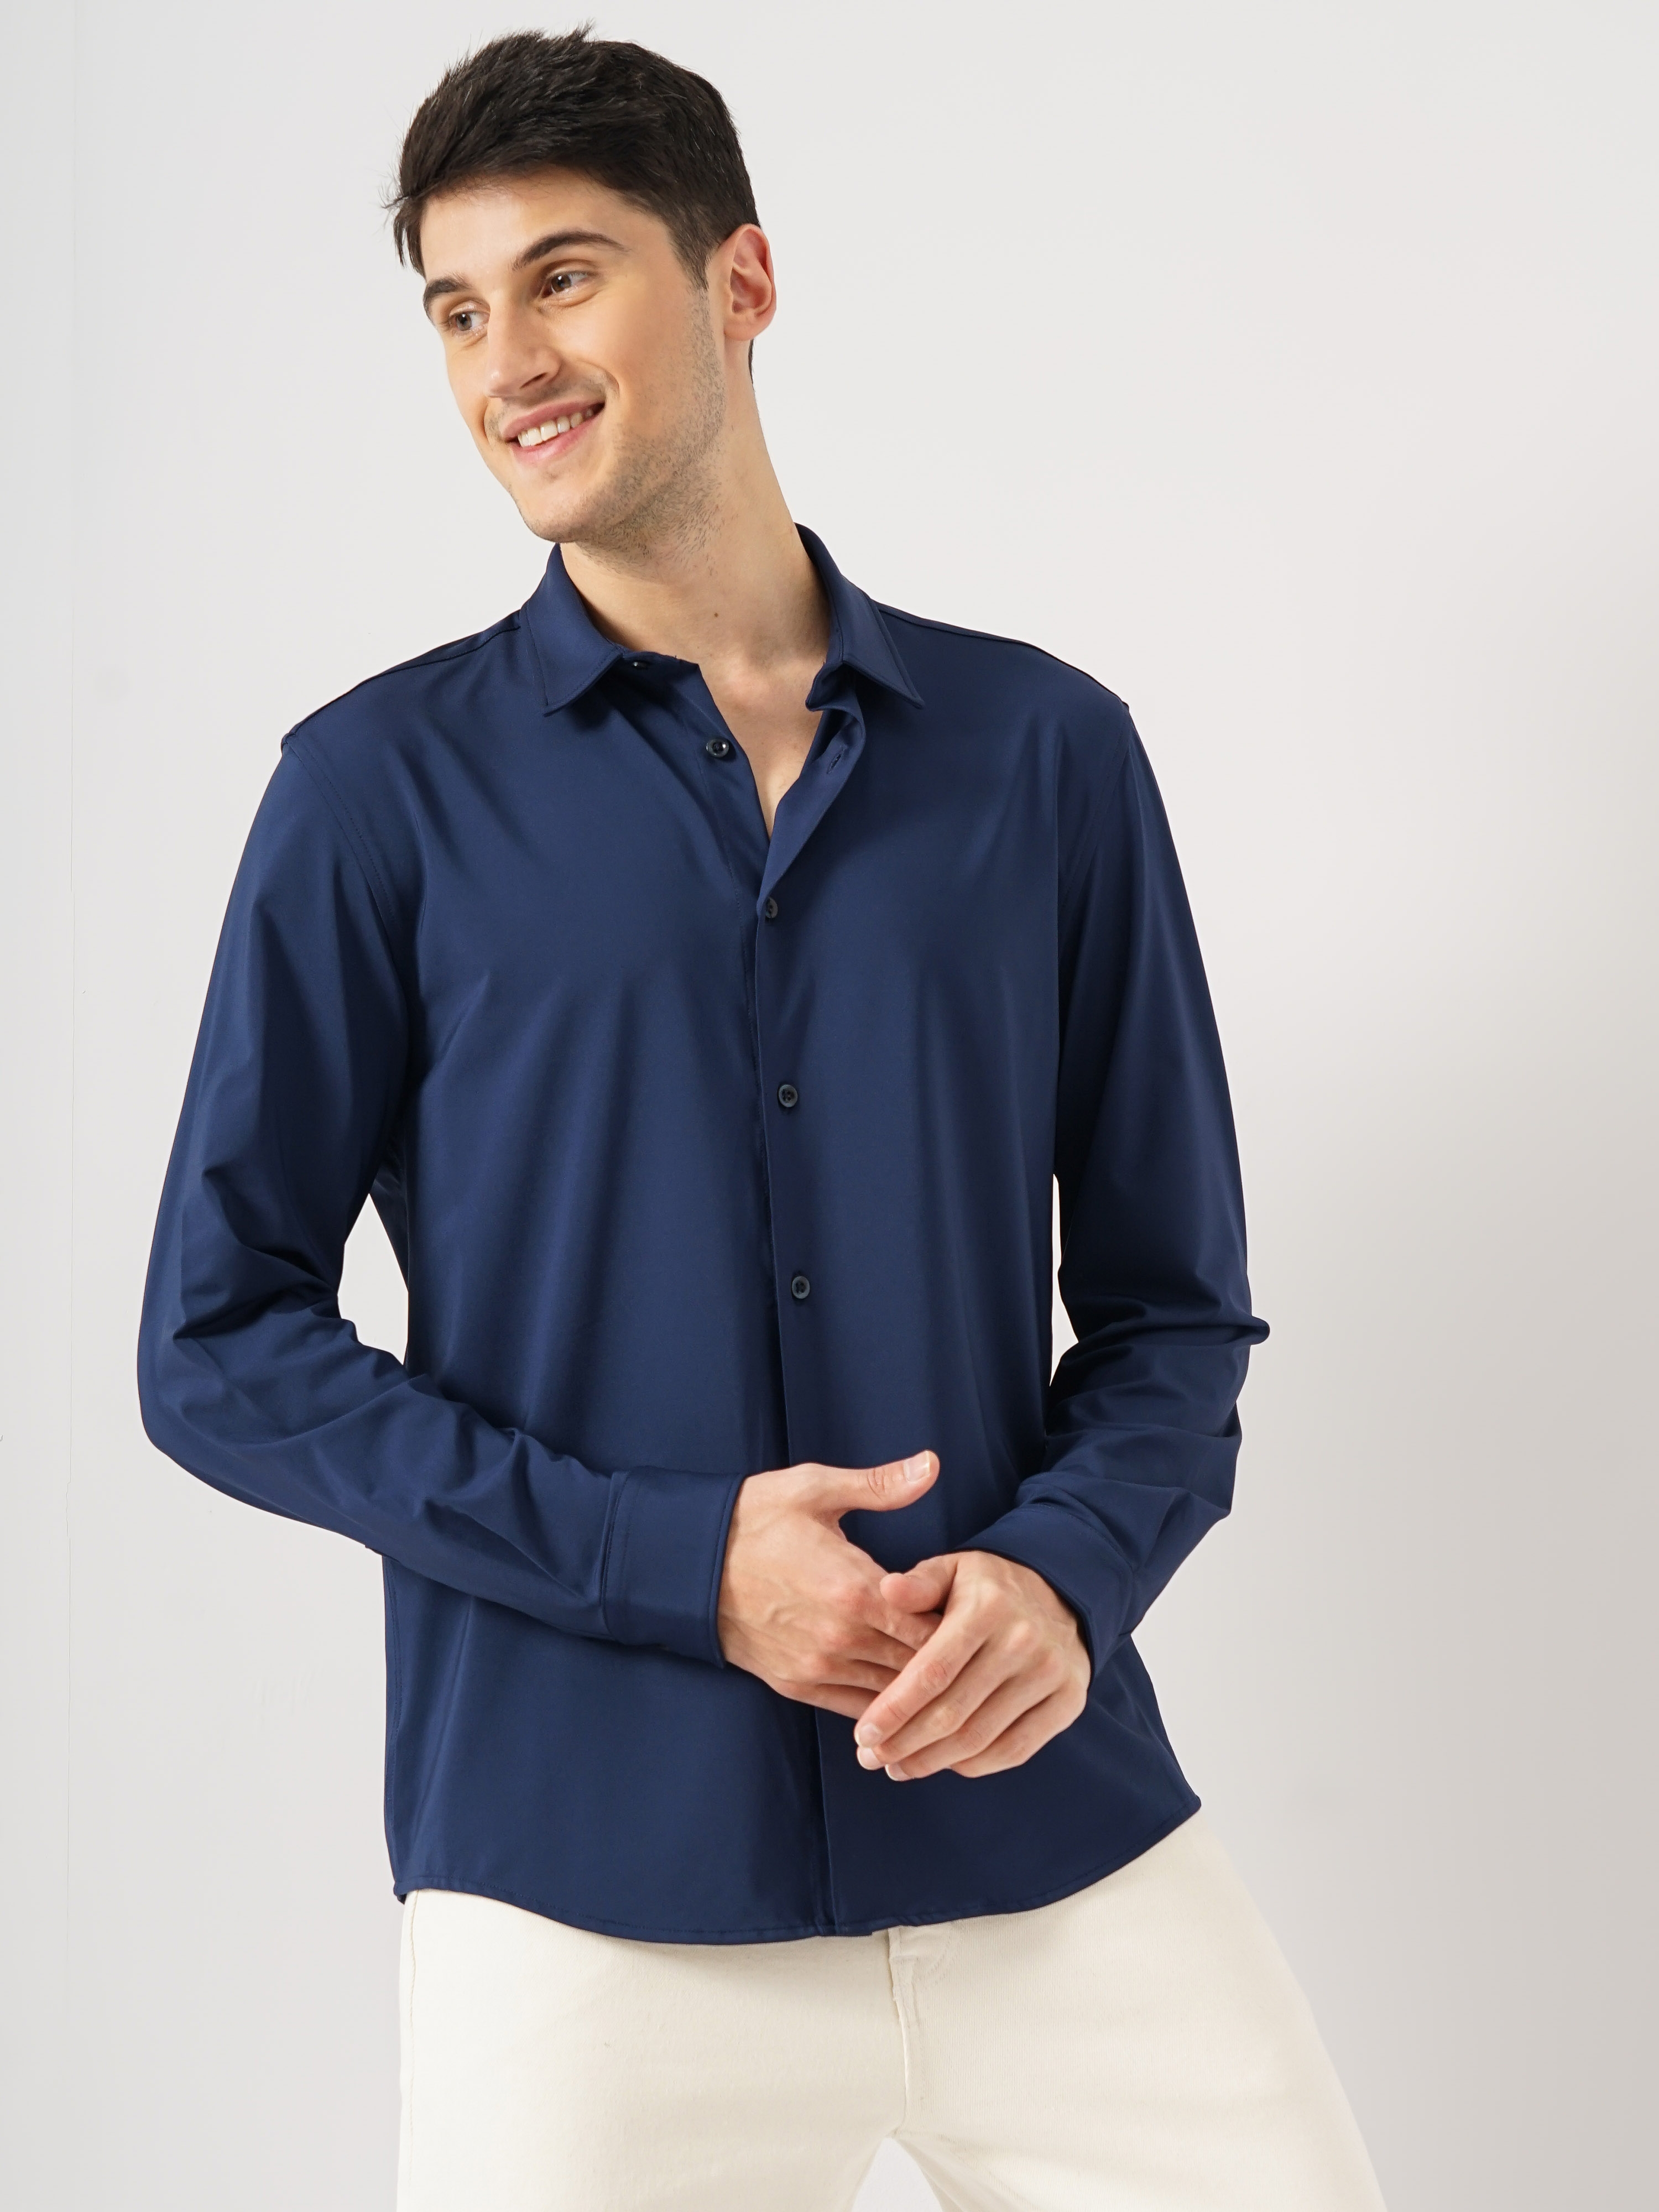 Celio Men Navy Blue Solid Regular Fit Polyester Knit Casual Shirt